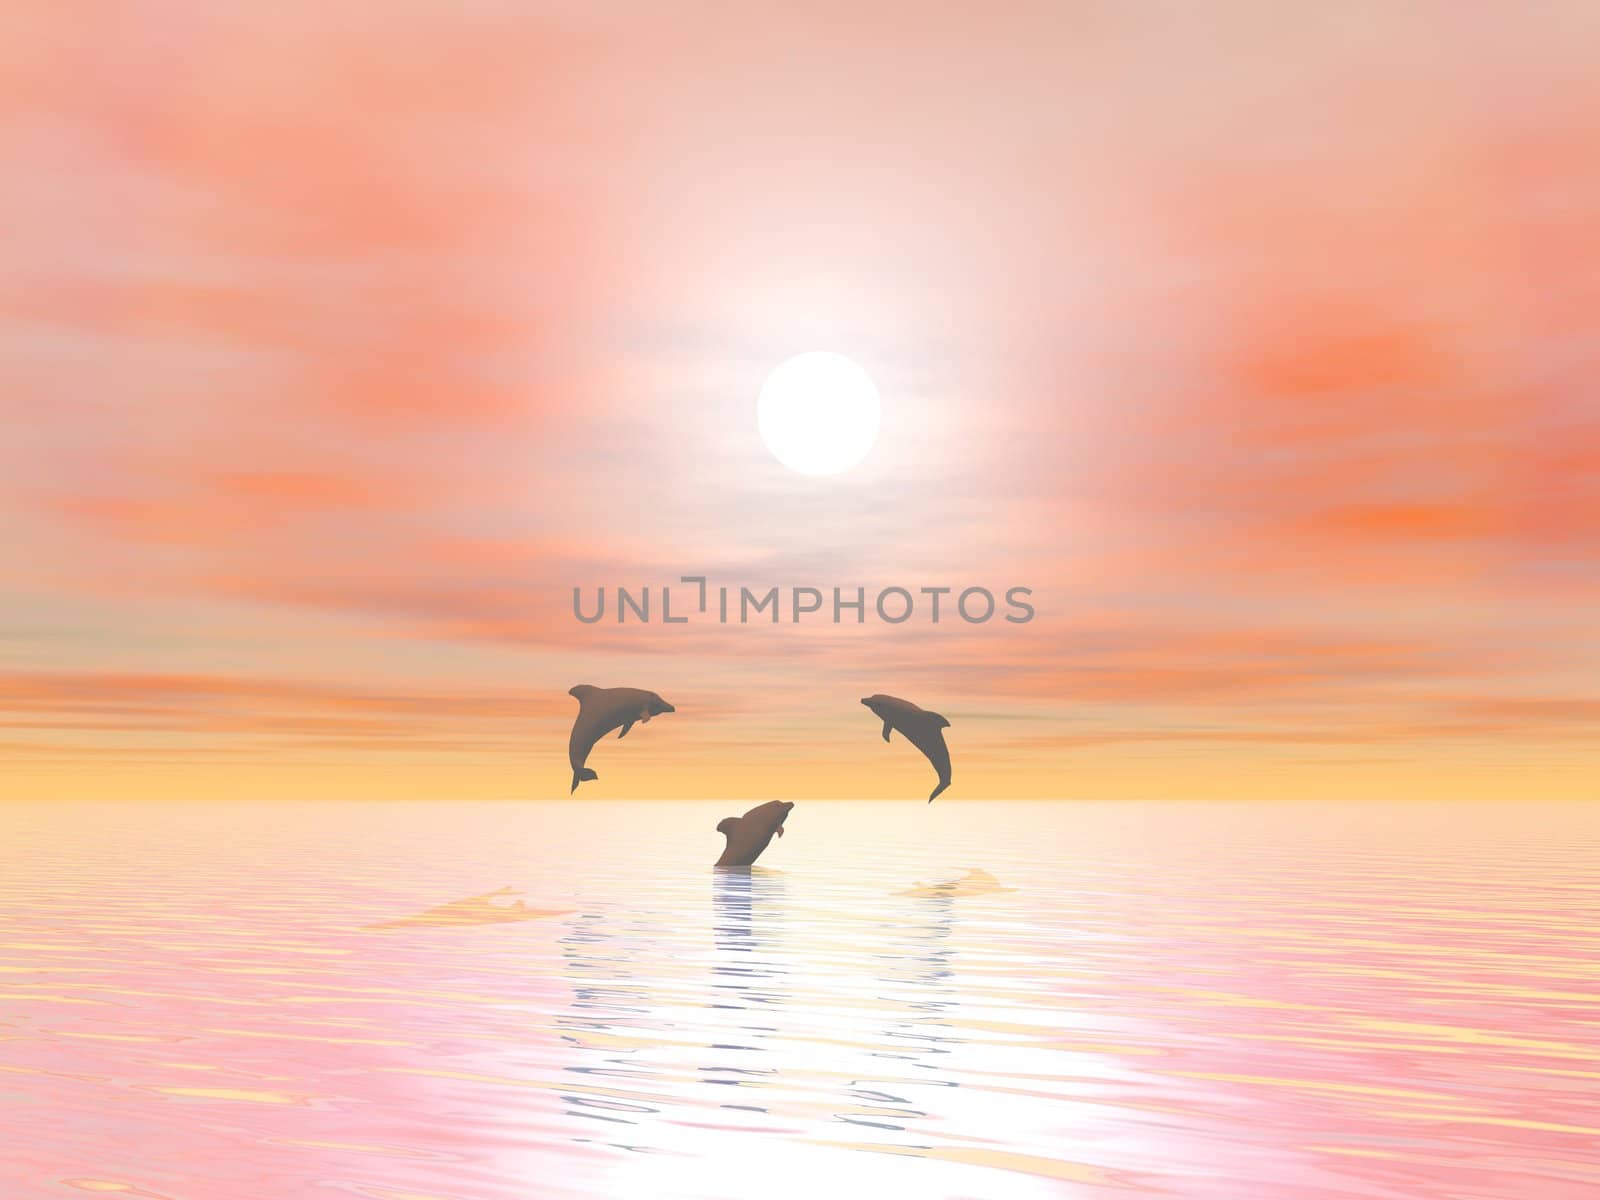 Shadow of three small dolphins jumping over the ocean by sunset